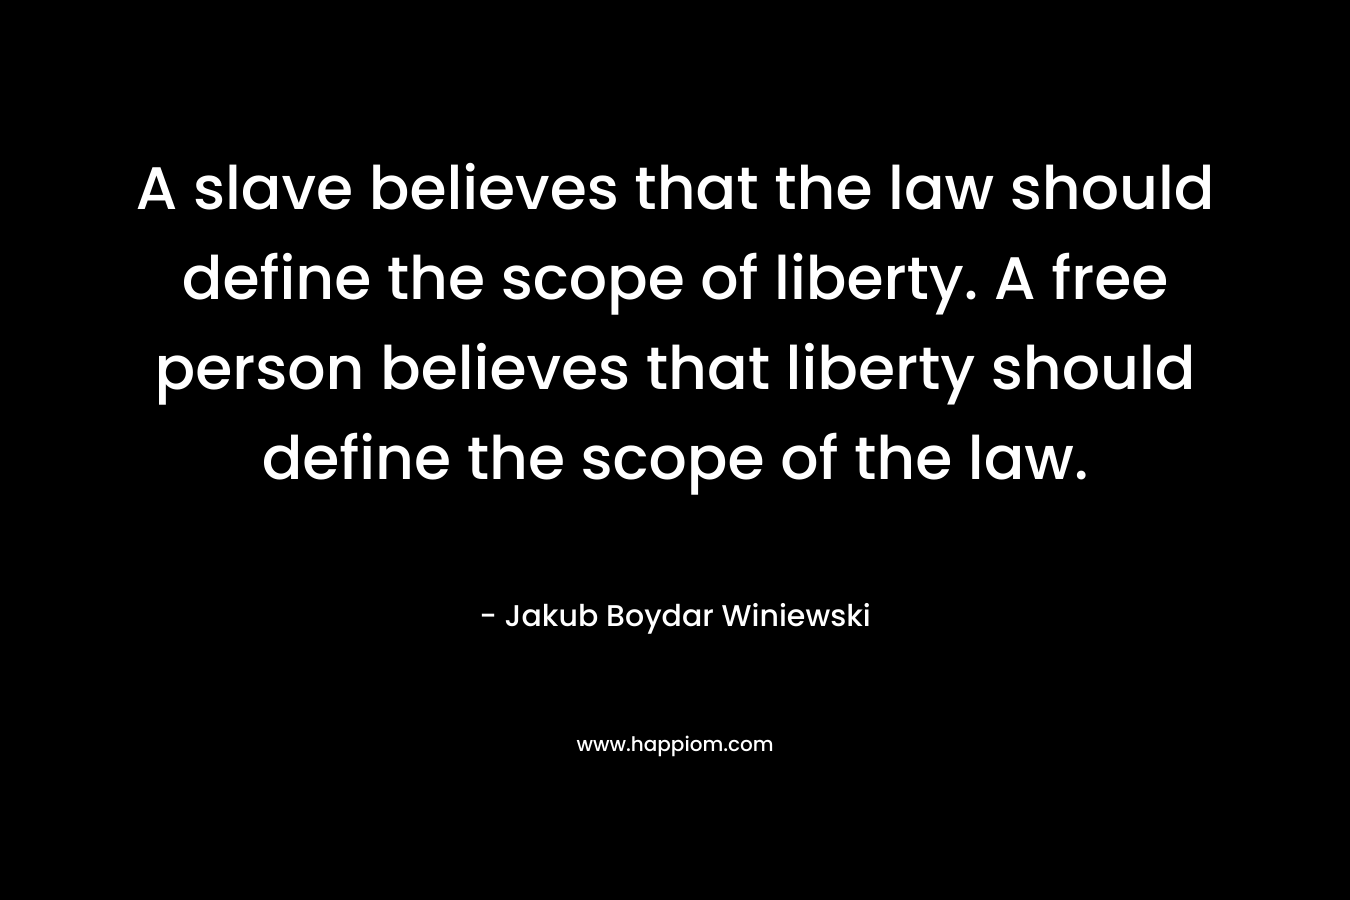 A slave believes that the law should define the scope of liberty. A free person believes that liberty should define the scope of the law.